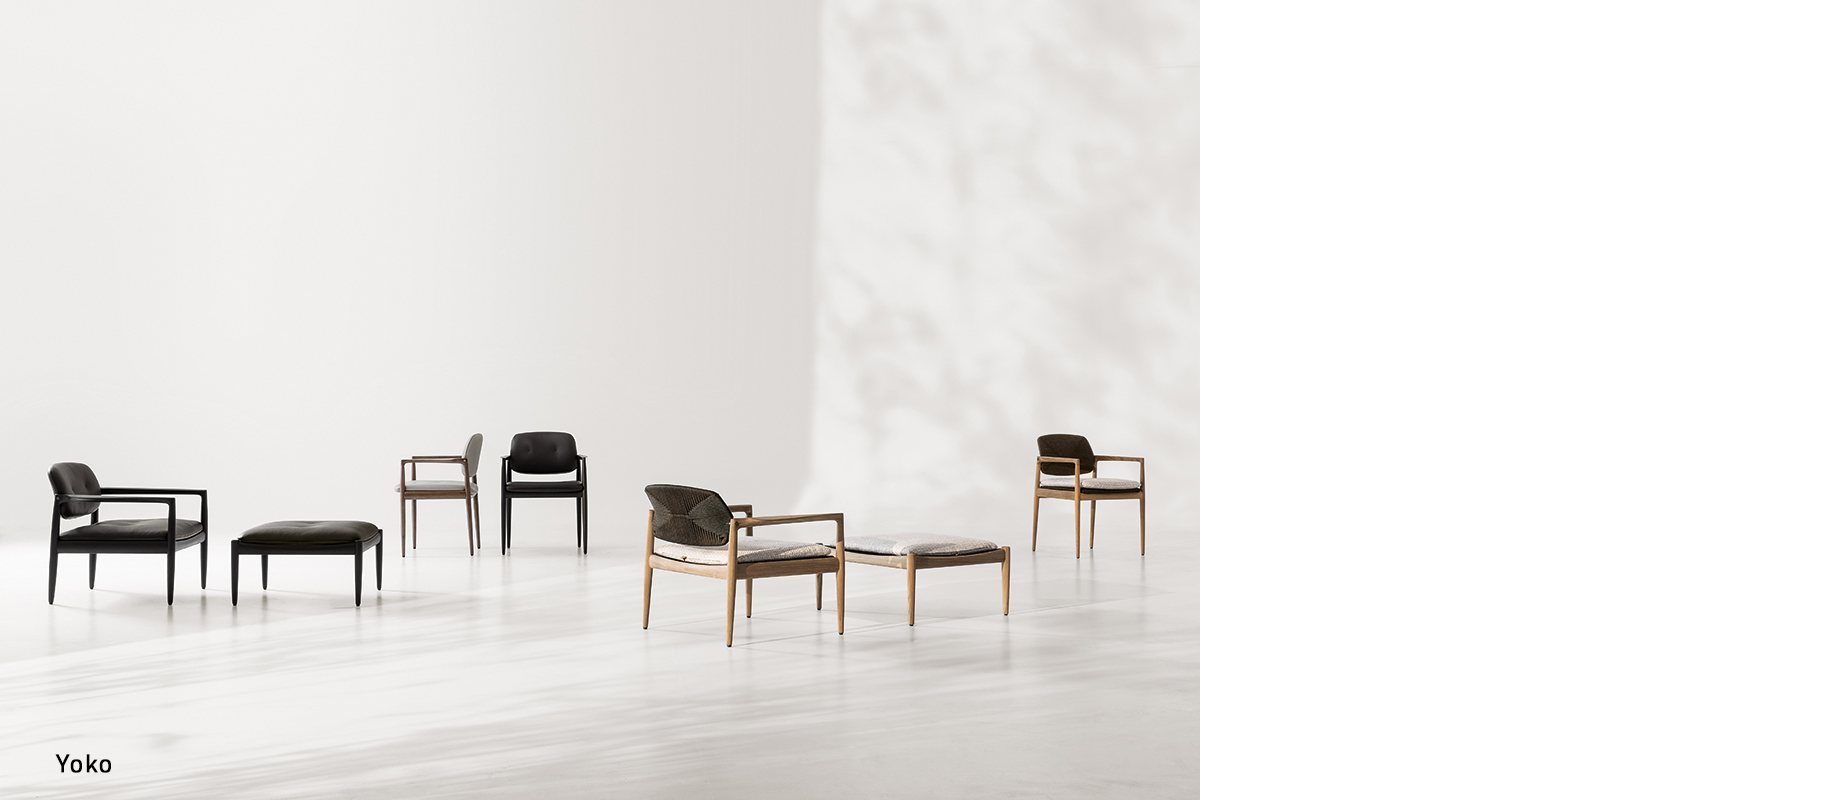 <p>Their debut is marked by the elegant <strong>Yoko</strong> armchairs, little armchairs and footstools, by the organic shapes of the <strong>Lars</strong> sofa and by the compact <strong>Sendai</strong> seats, in the sofa, armchair, lounge and dining little dining versions, both fixed and swivel. The duo is also behind the <strong>Yoko Cord Outdoor</strong> range in the armchair, dining little armchair and footstool versions.</p>
